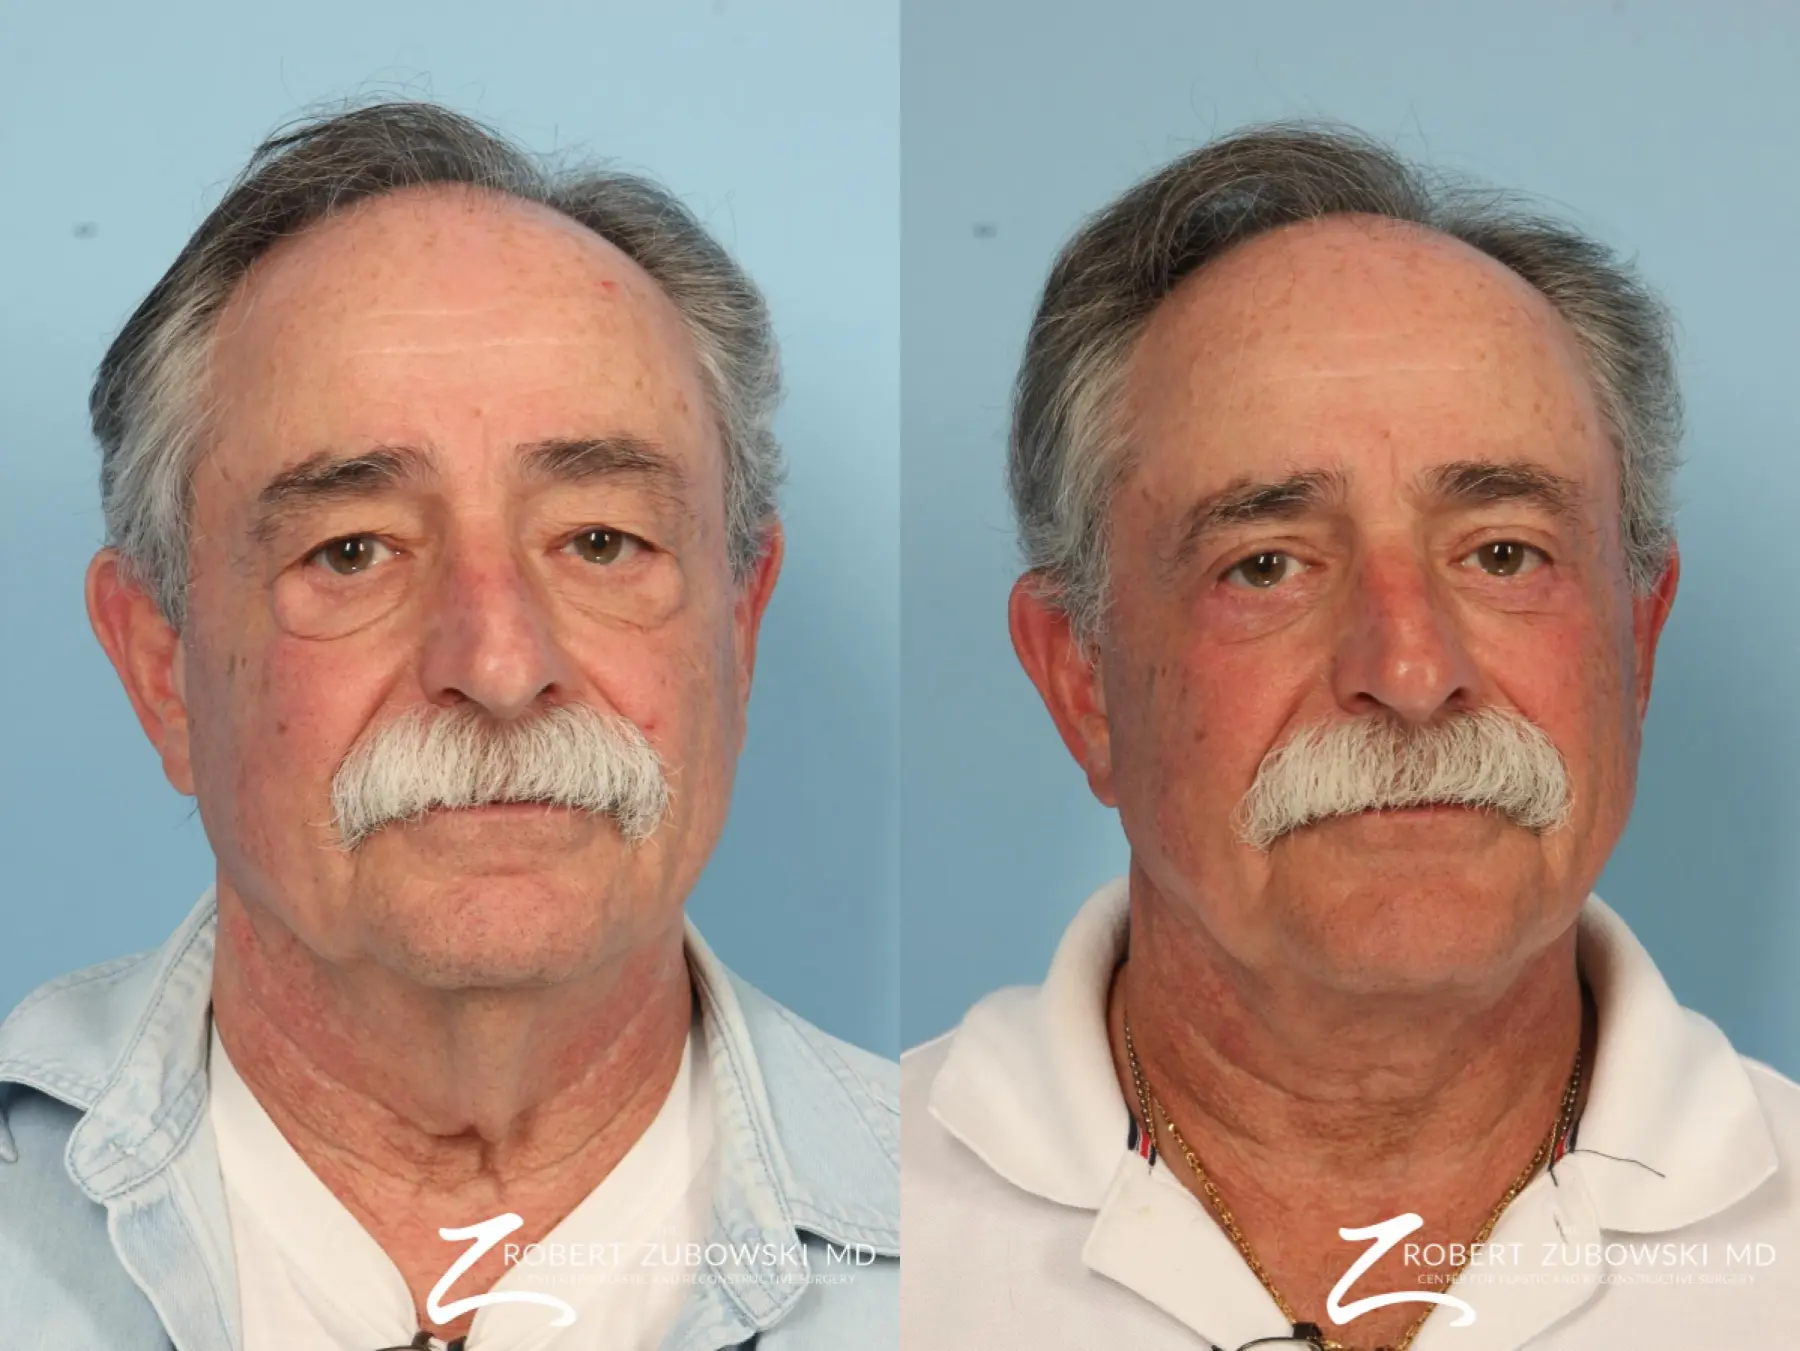 Blepharoplasty-for-men: Patient 2 - Before and After  